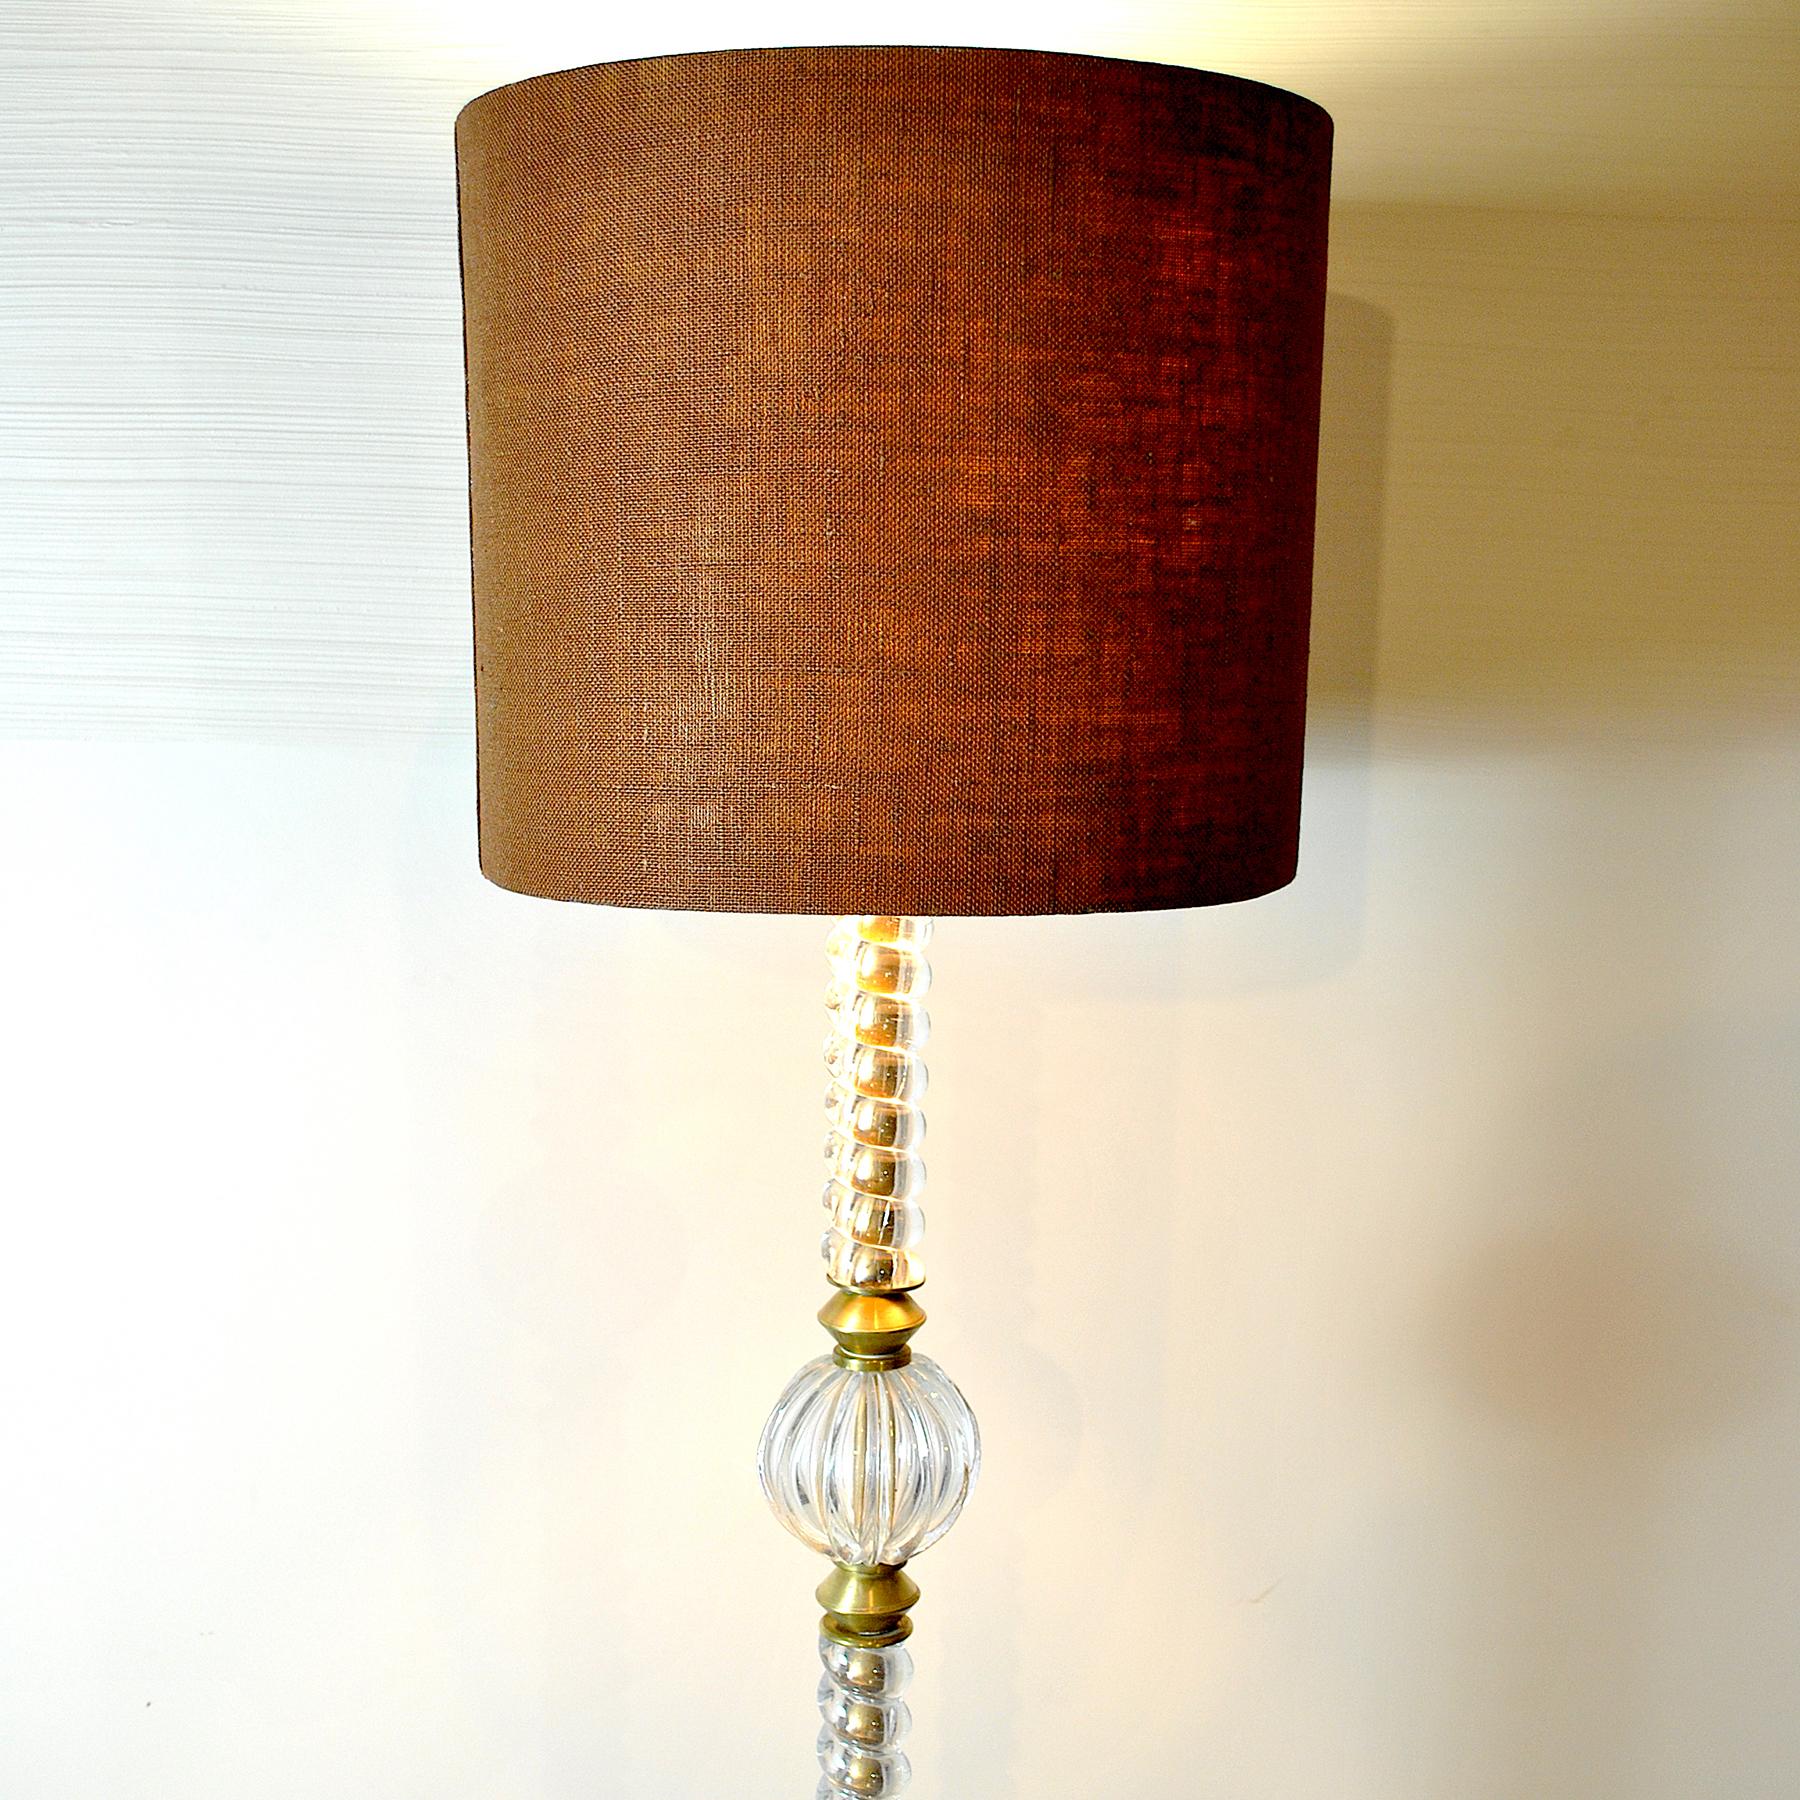 Italian Midcentury Floor Lamp by Barovier & Toso For Sale 7